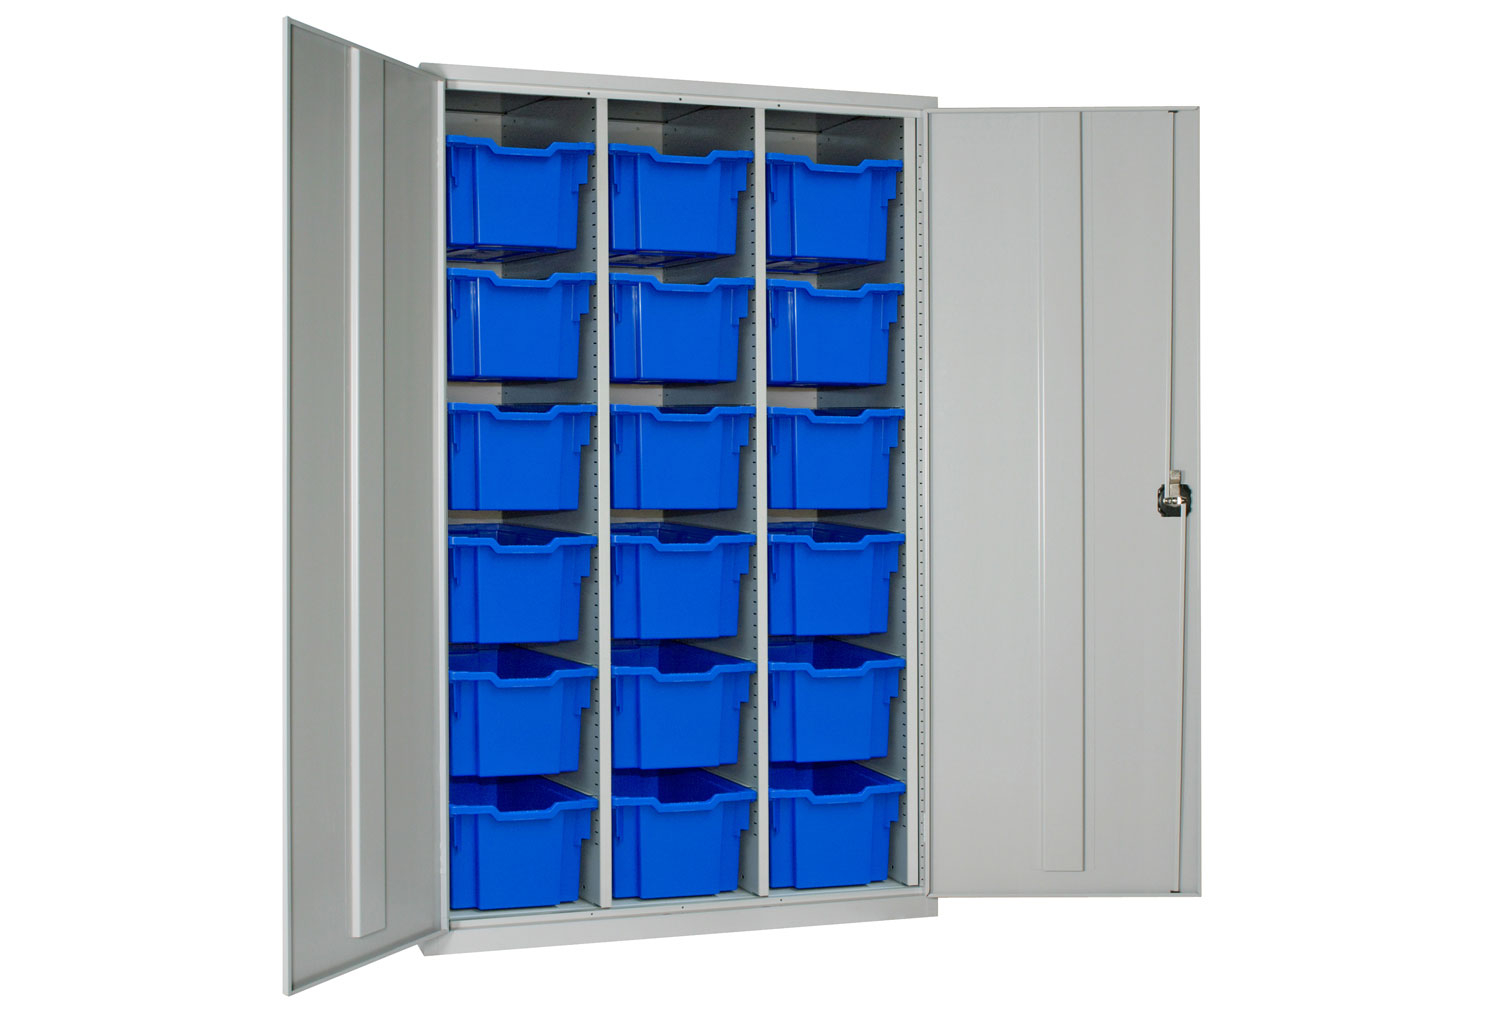 Elite High Capacity Storage Office Cupboards With 18 Extra Deep Trays, Dark Grey With Translucent Trays